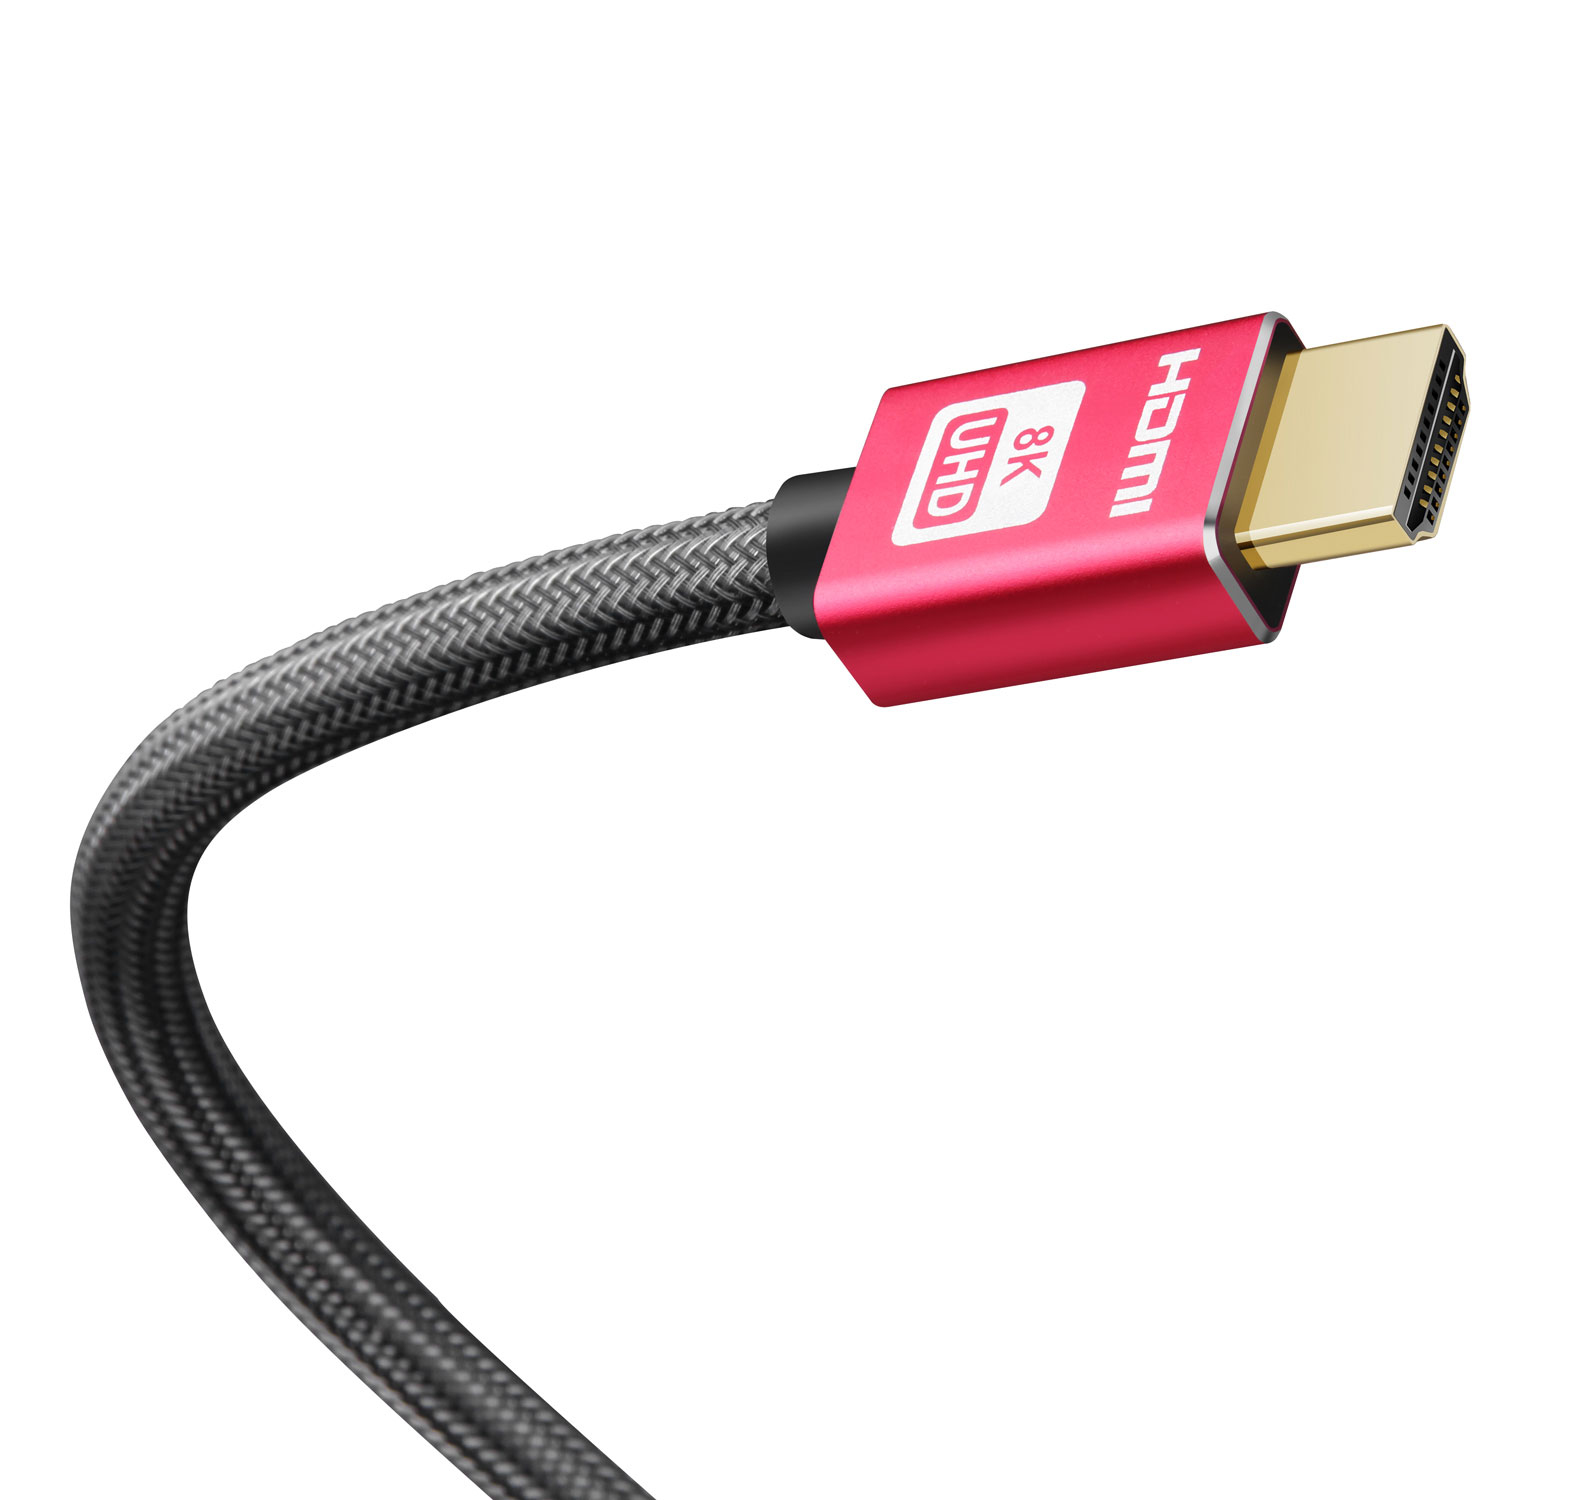 8K 60Hz HDMI to HDMI Cable